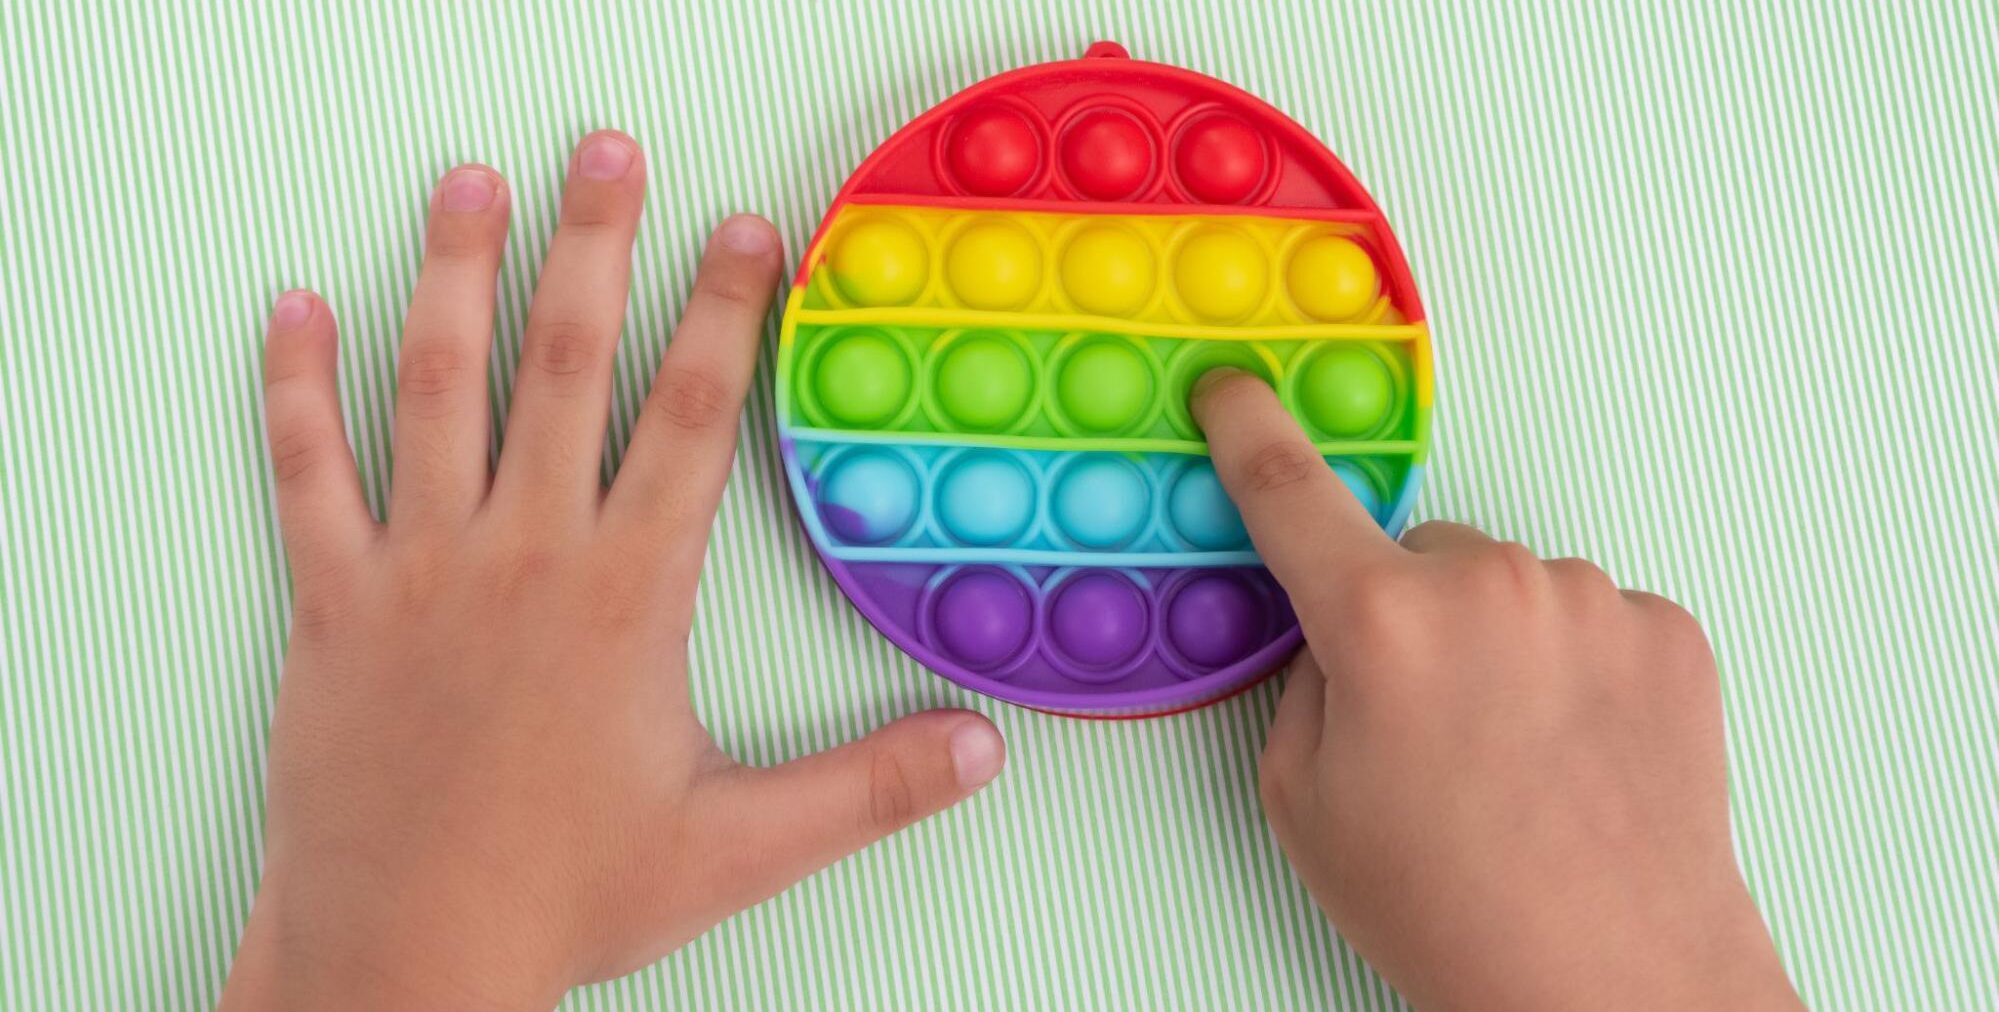 Bilateral hand coordination means that a kid is able to use both hands at the same time